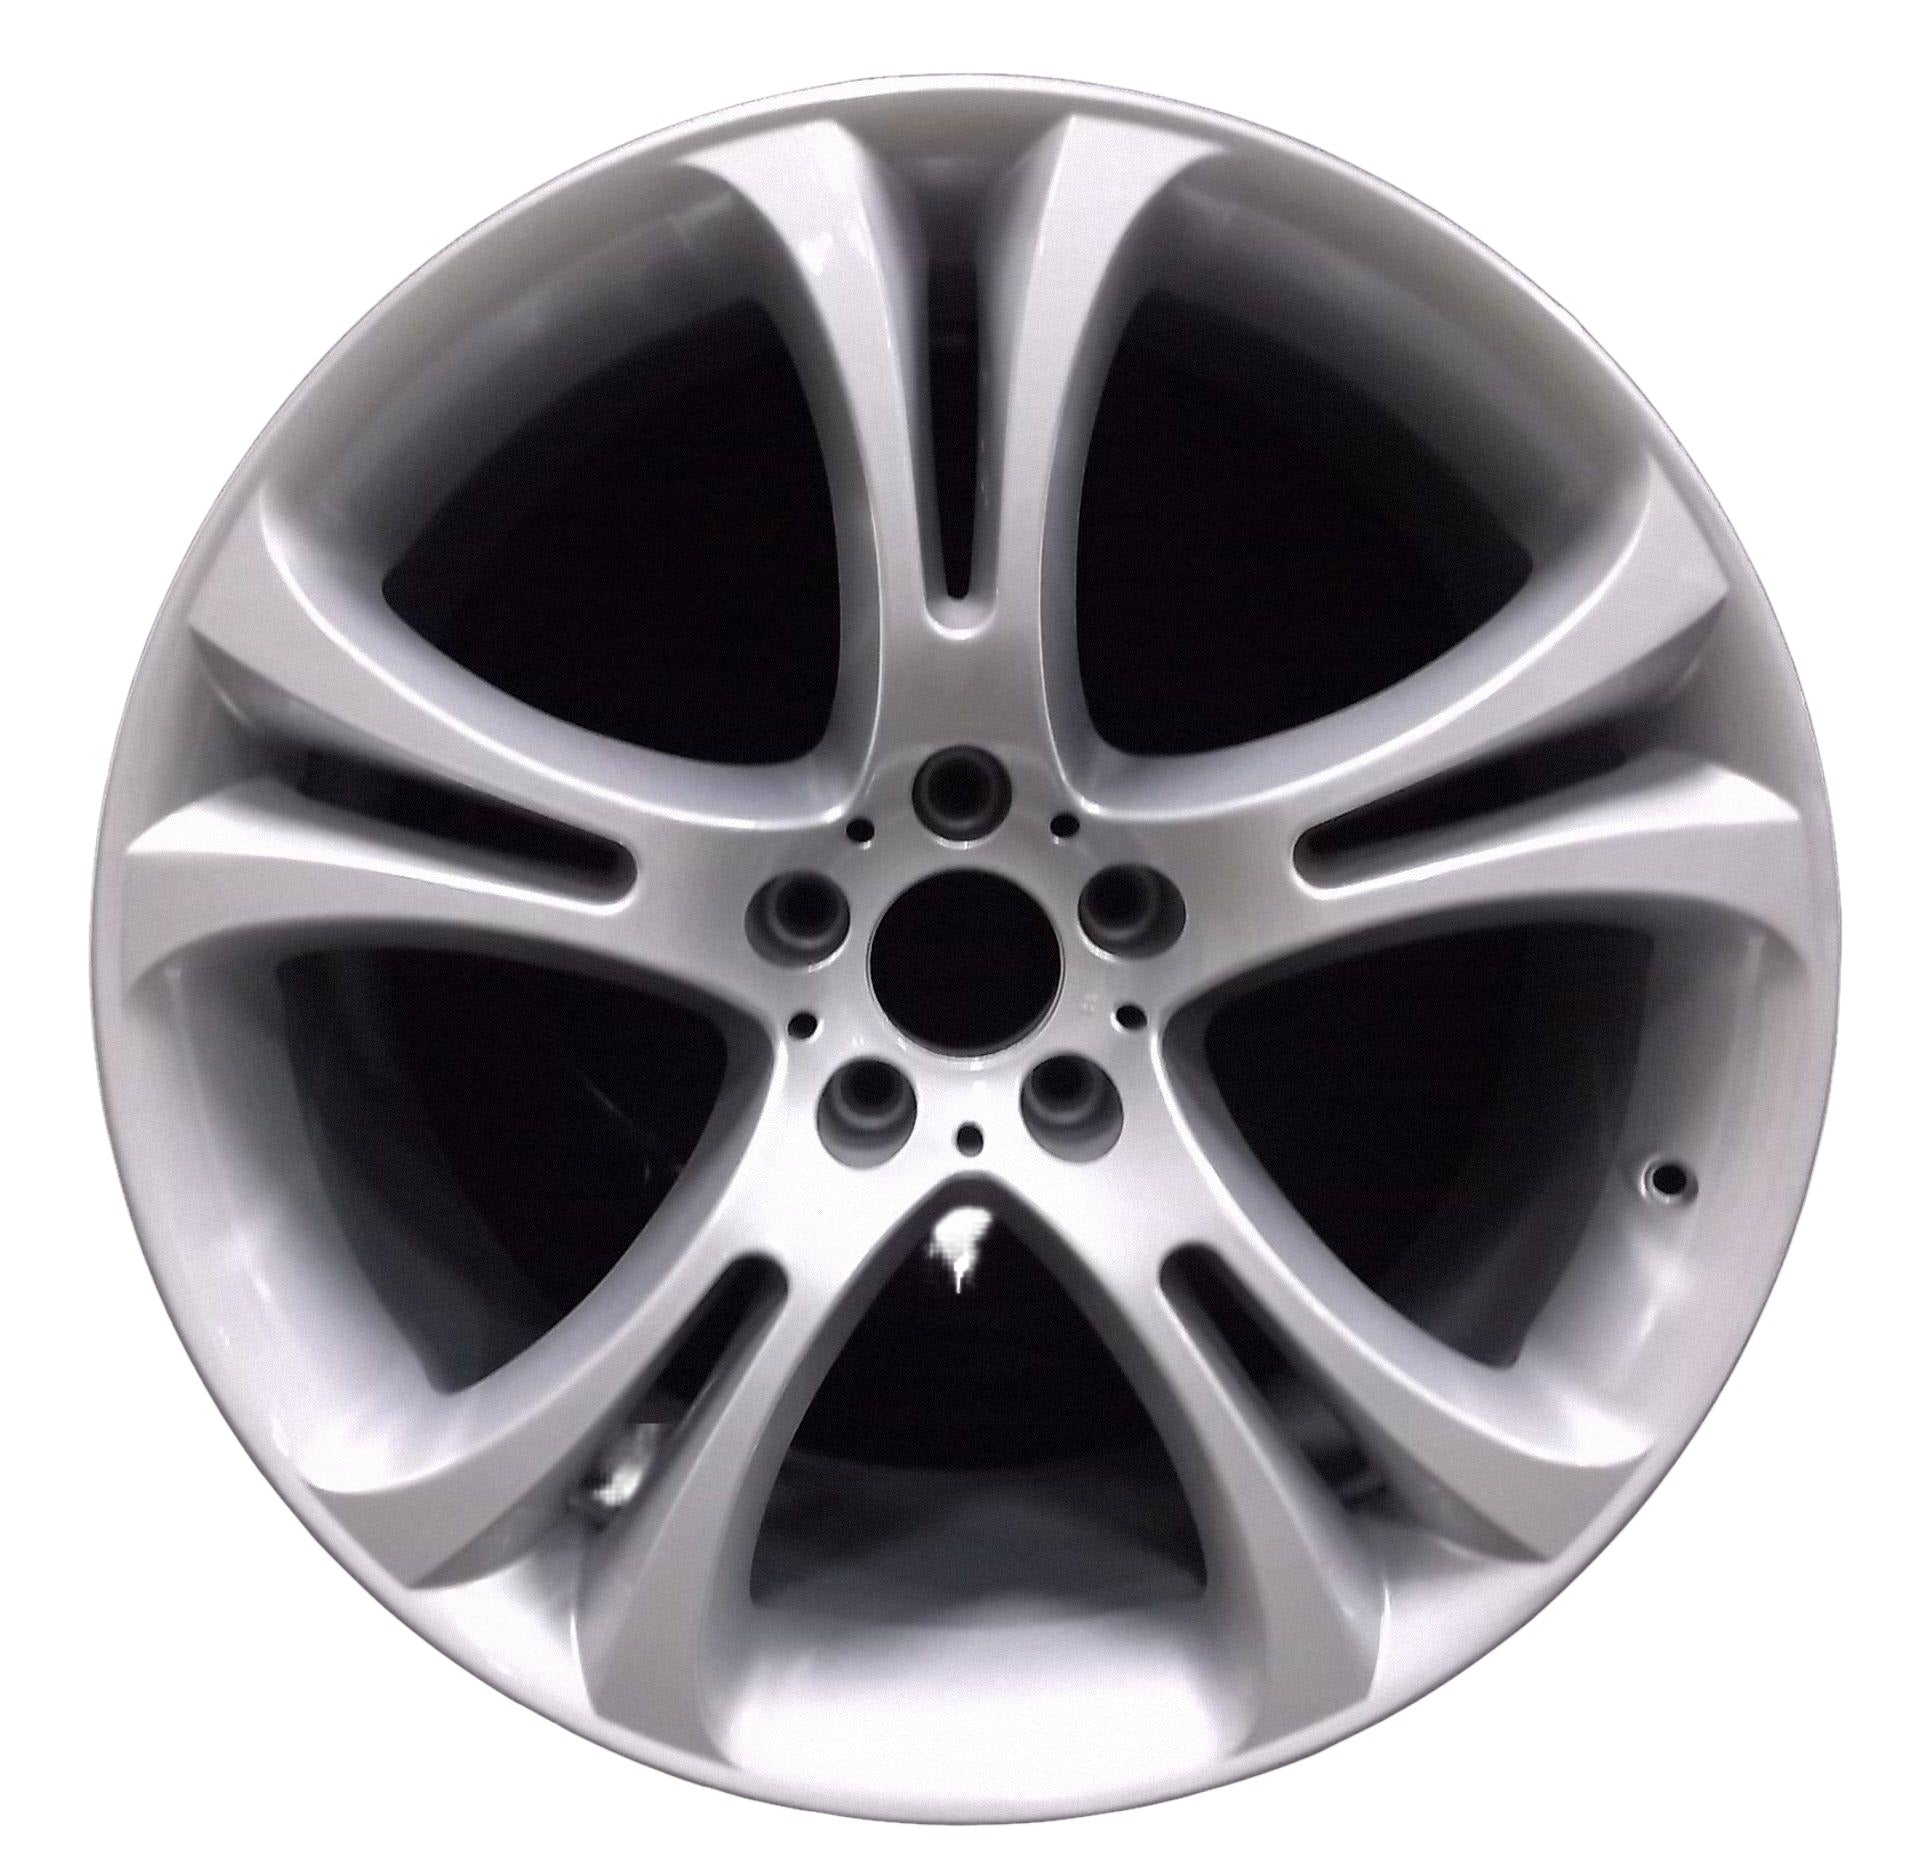 BMW X5M  2010, 2011, 2012, 2013, 2014, 2015 Factory OEM Car Wheel Size 21x11.5 Alloy WAO.71293RE.PS13.FF